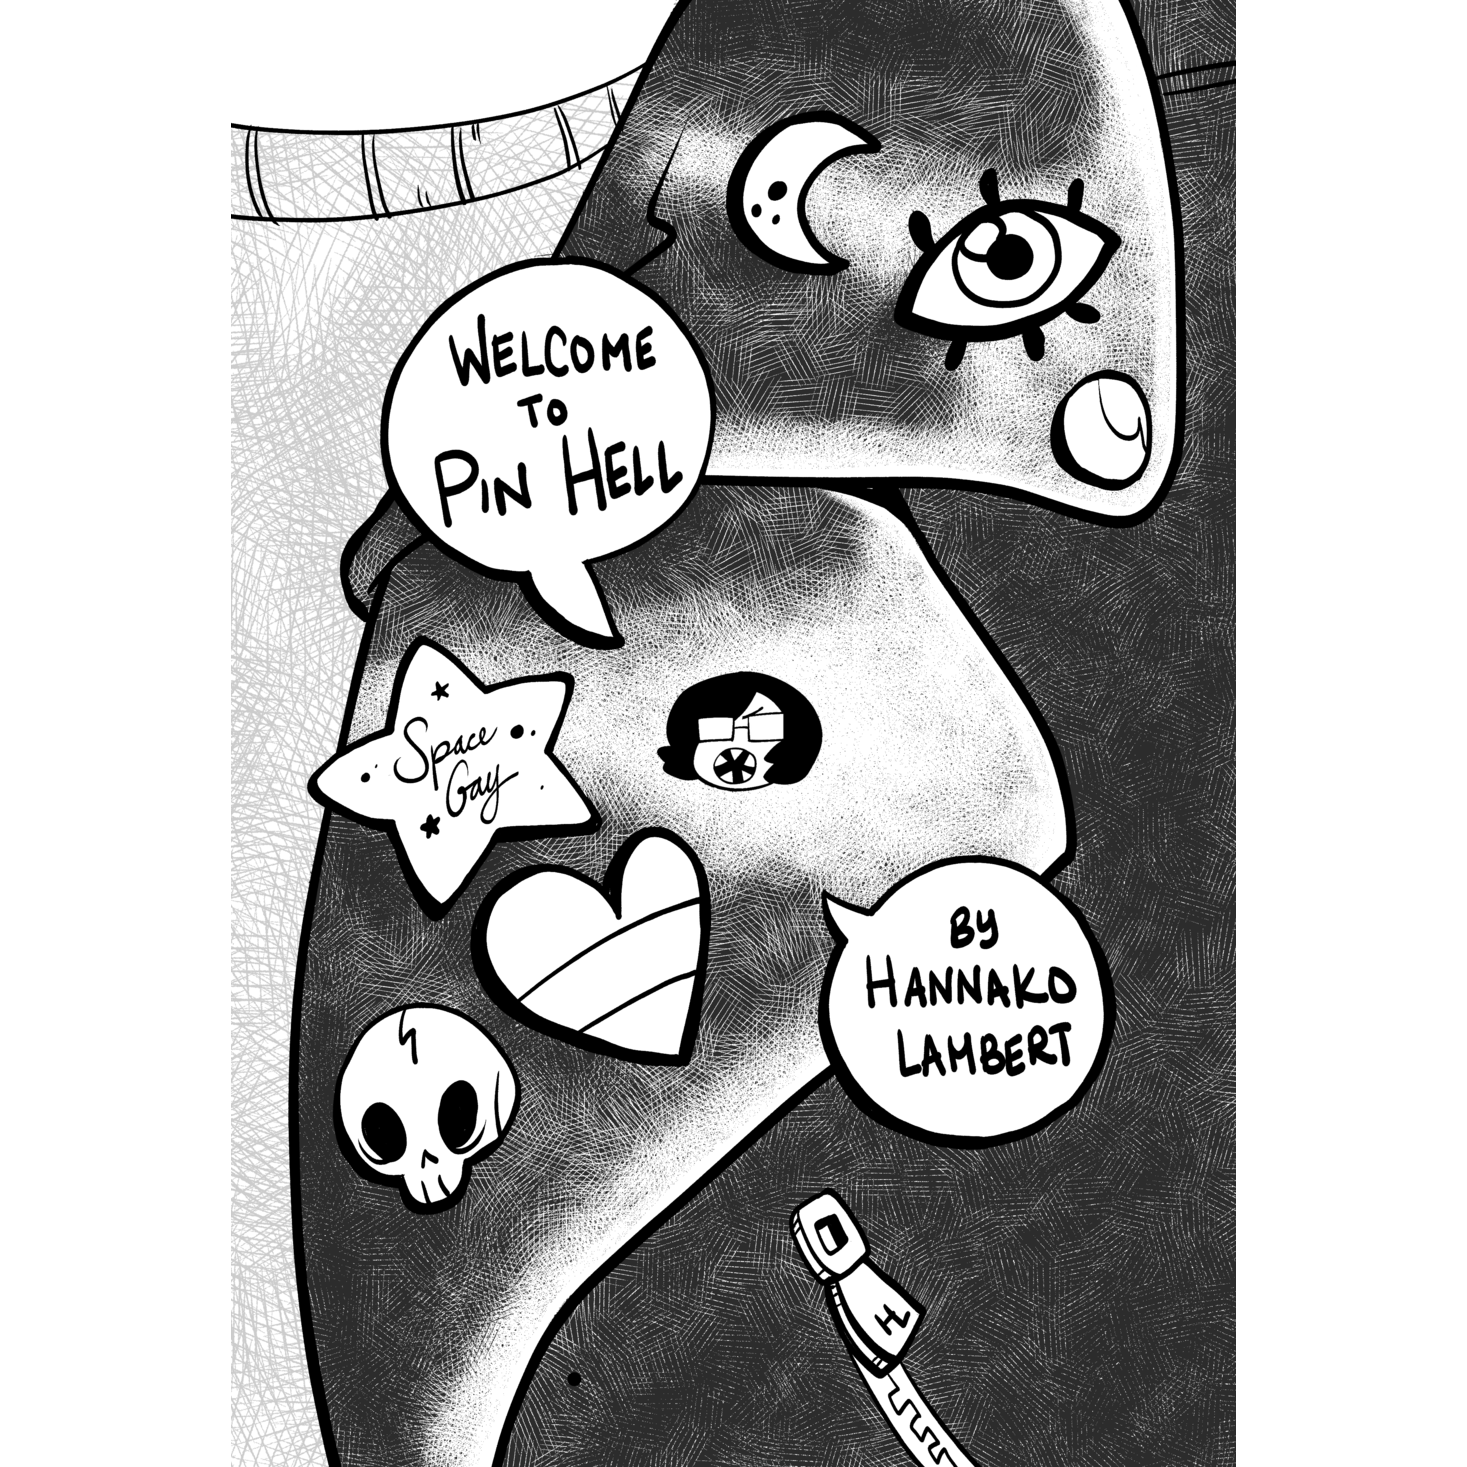 Cover of "Welcome to Pin Hell" book guide by Hannako Lambert. Black and white illustration shows different pins on a closeup of a jacket lapel.